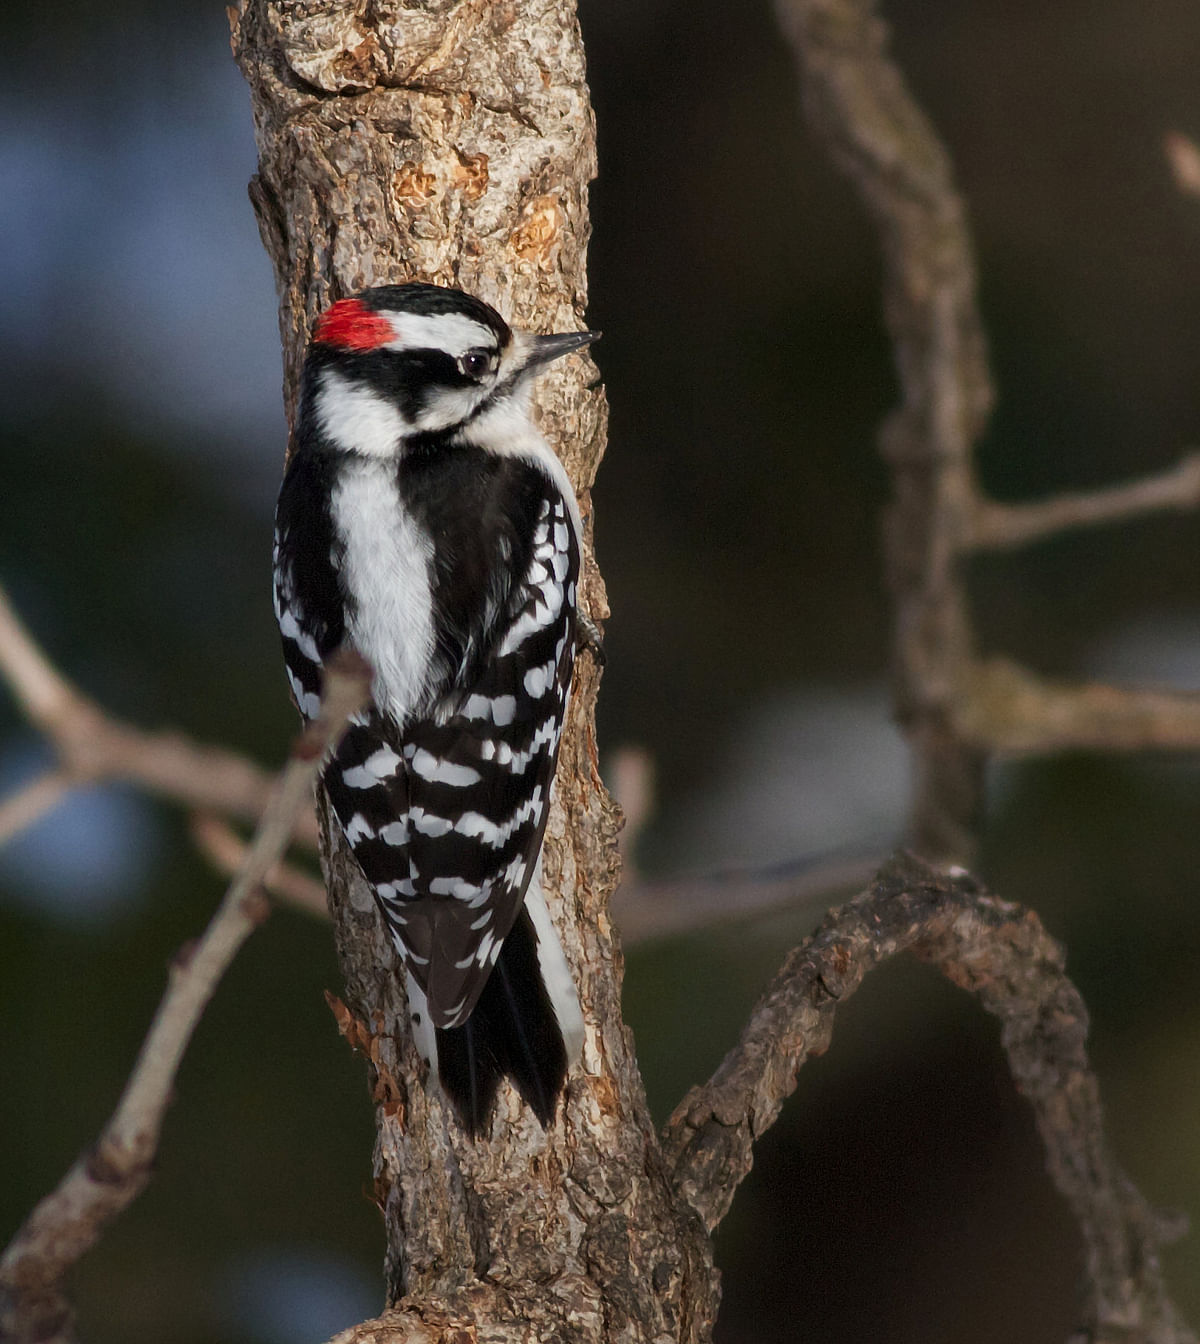 A Downy woodpecker is shown in this undated photo provided on 2 February 2018. Photo: Reuters